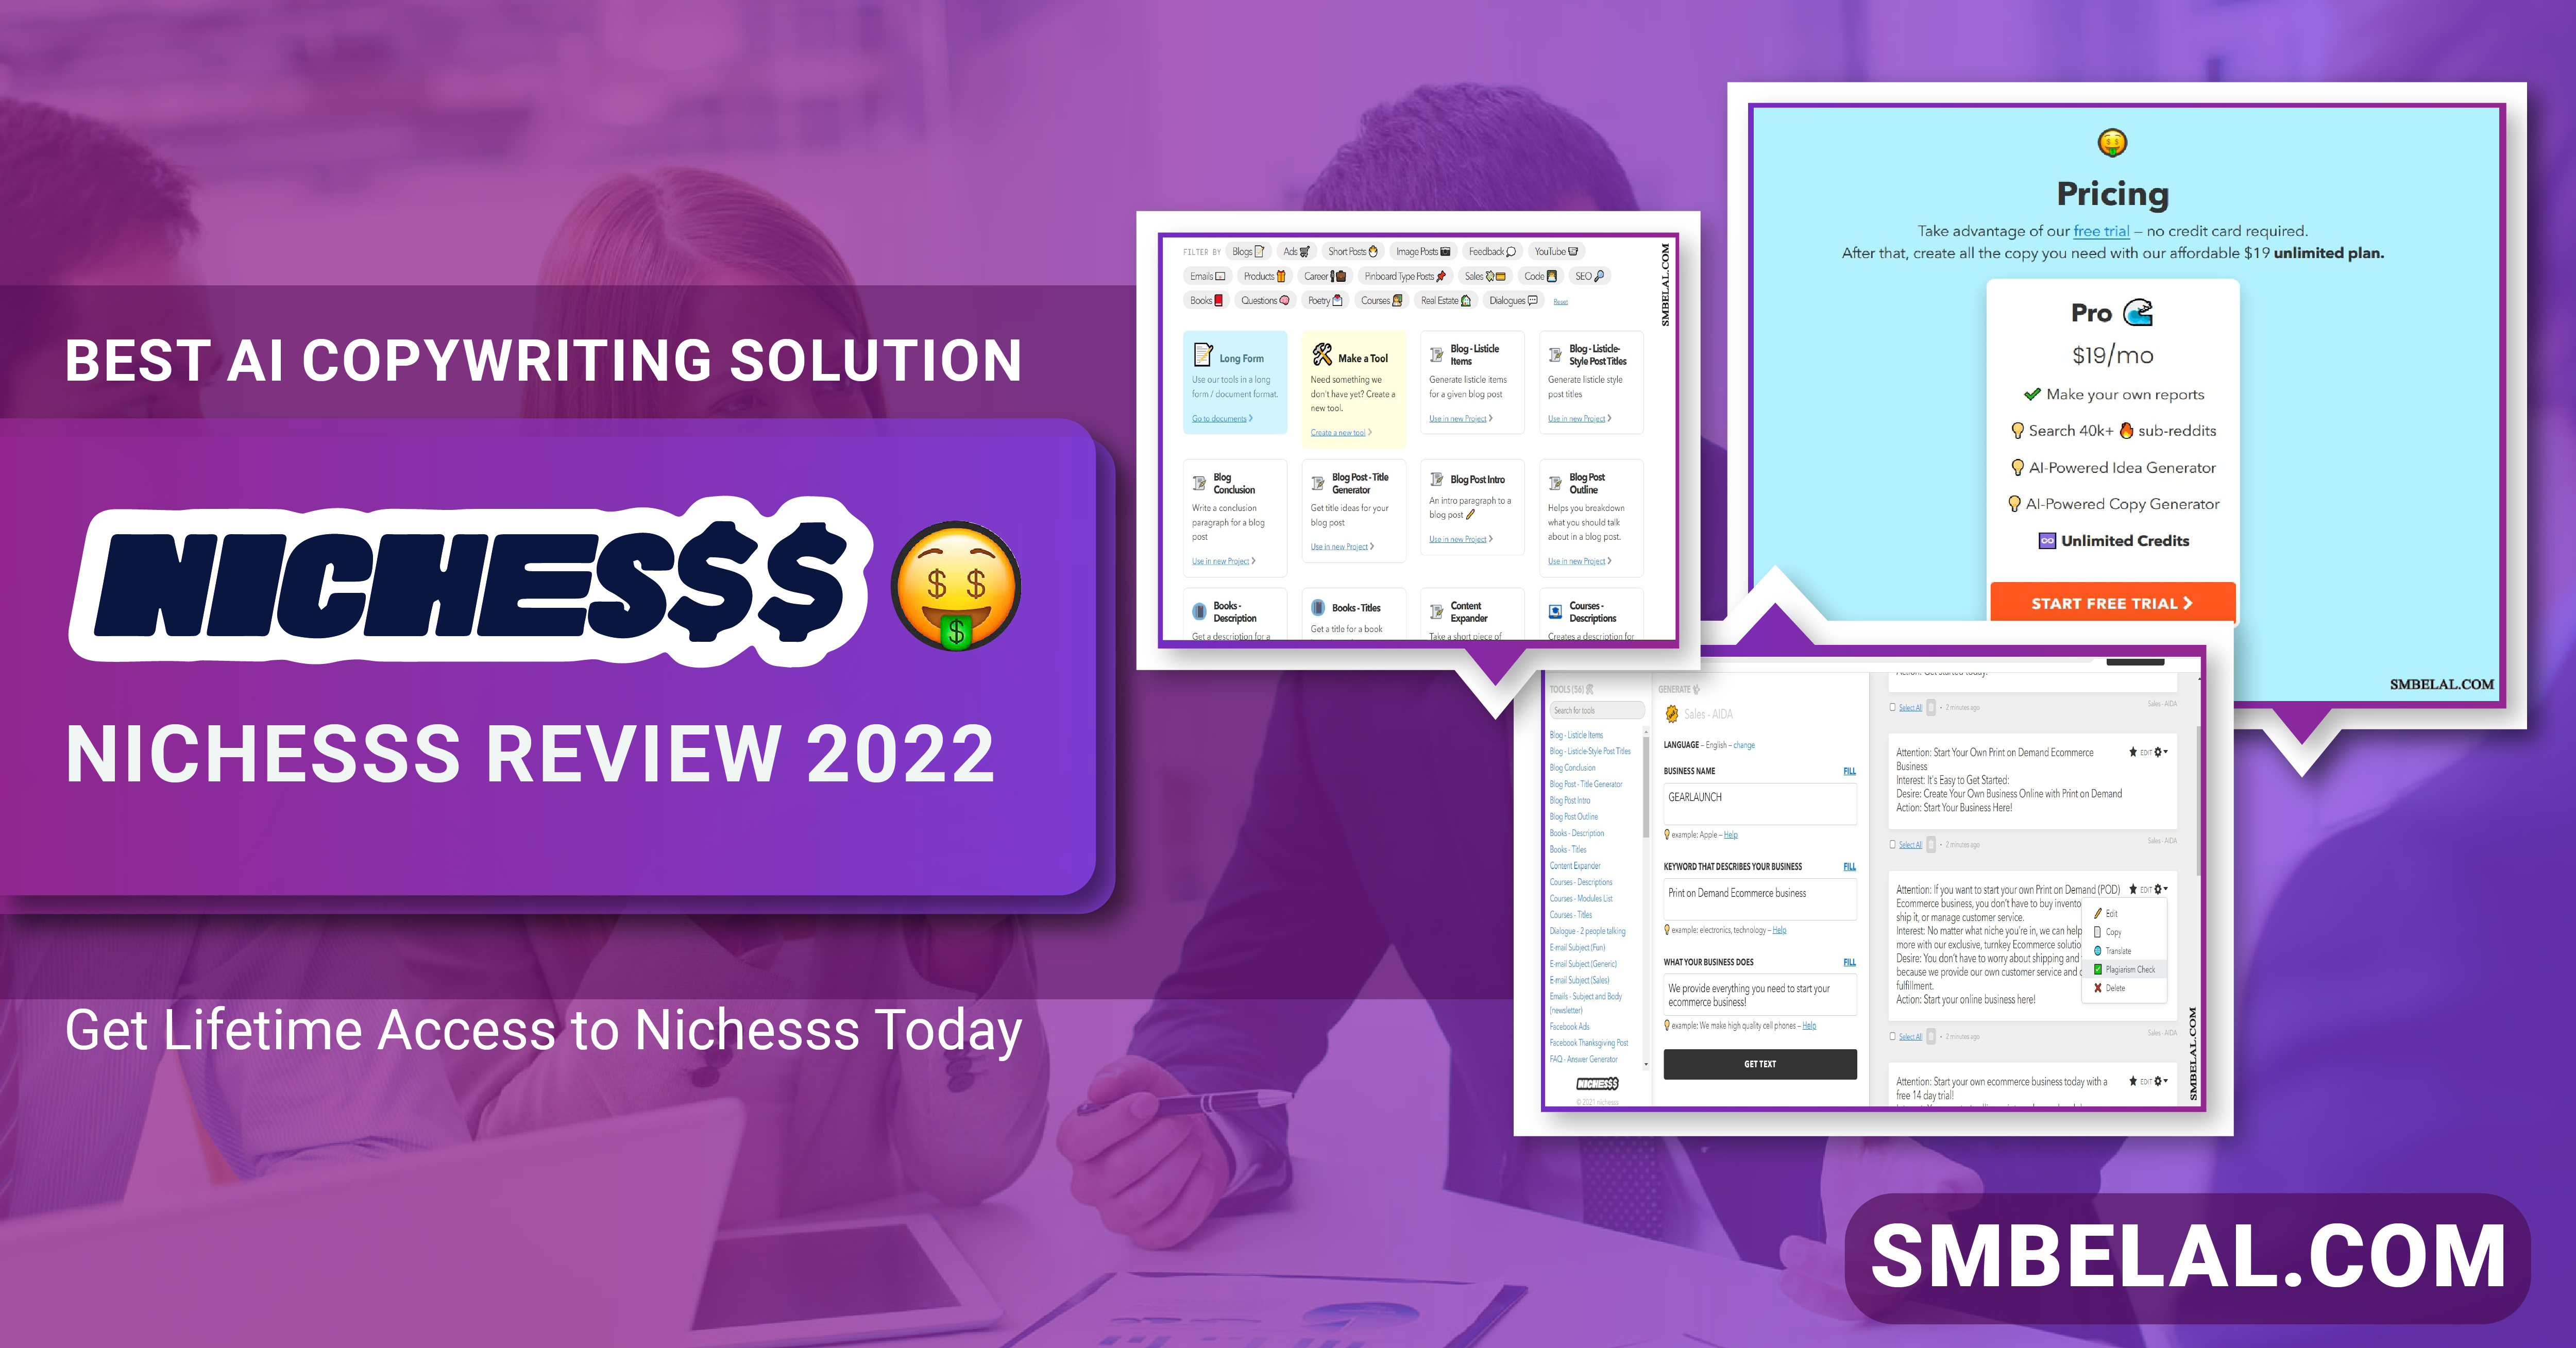 Nichesss Review 2022 Best Ai Copywriting Solution